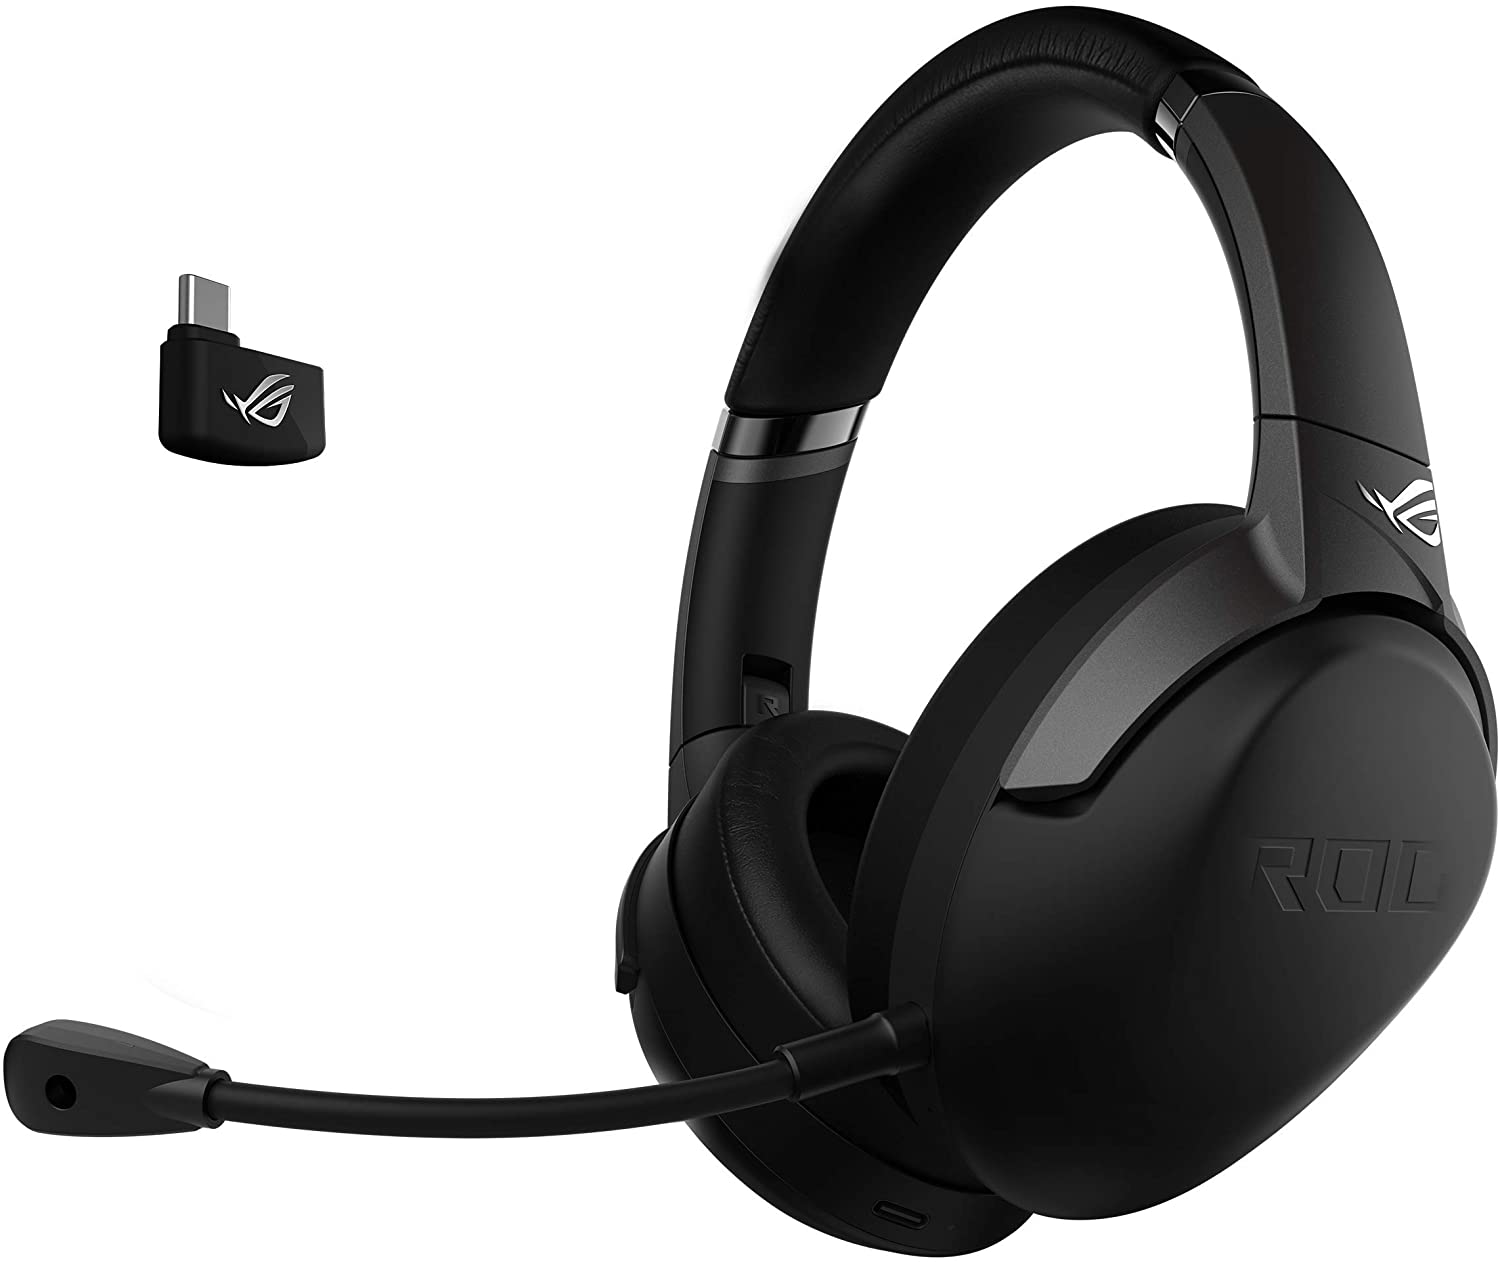 ASUS Republic of Gamers Strix Go 2.4 Wireless Gaming Headset $100 + Free Shipping